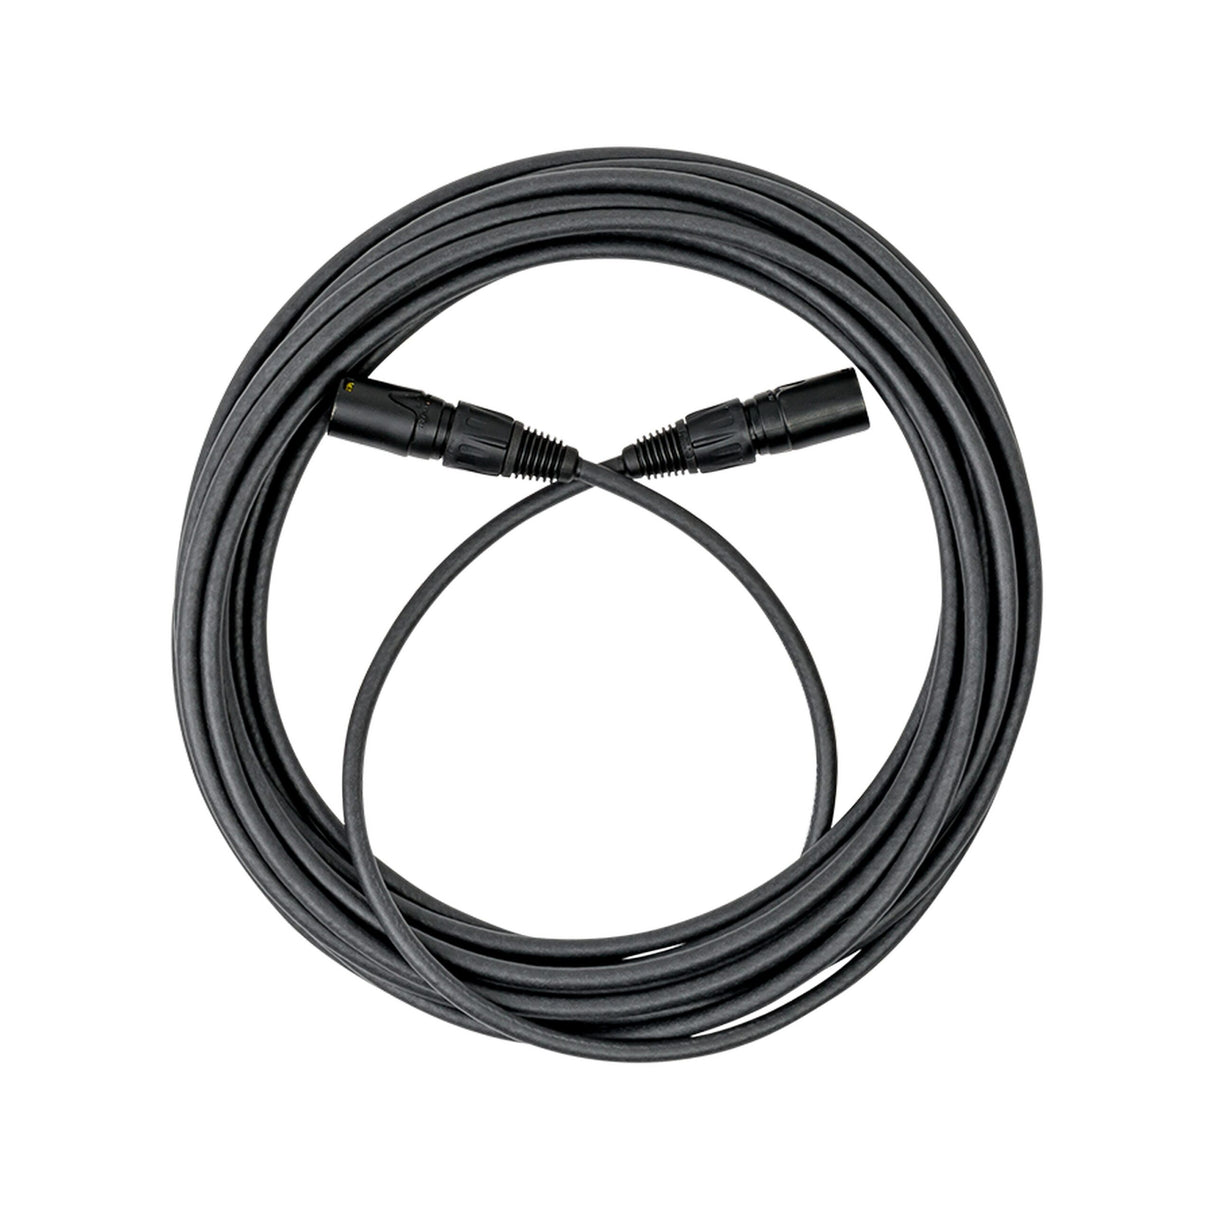 SoundTools SuperCAT etherCON to etherCON CAT5e Cable, Black, 7.6 Meter